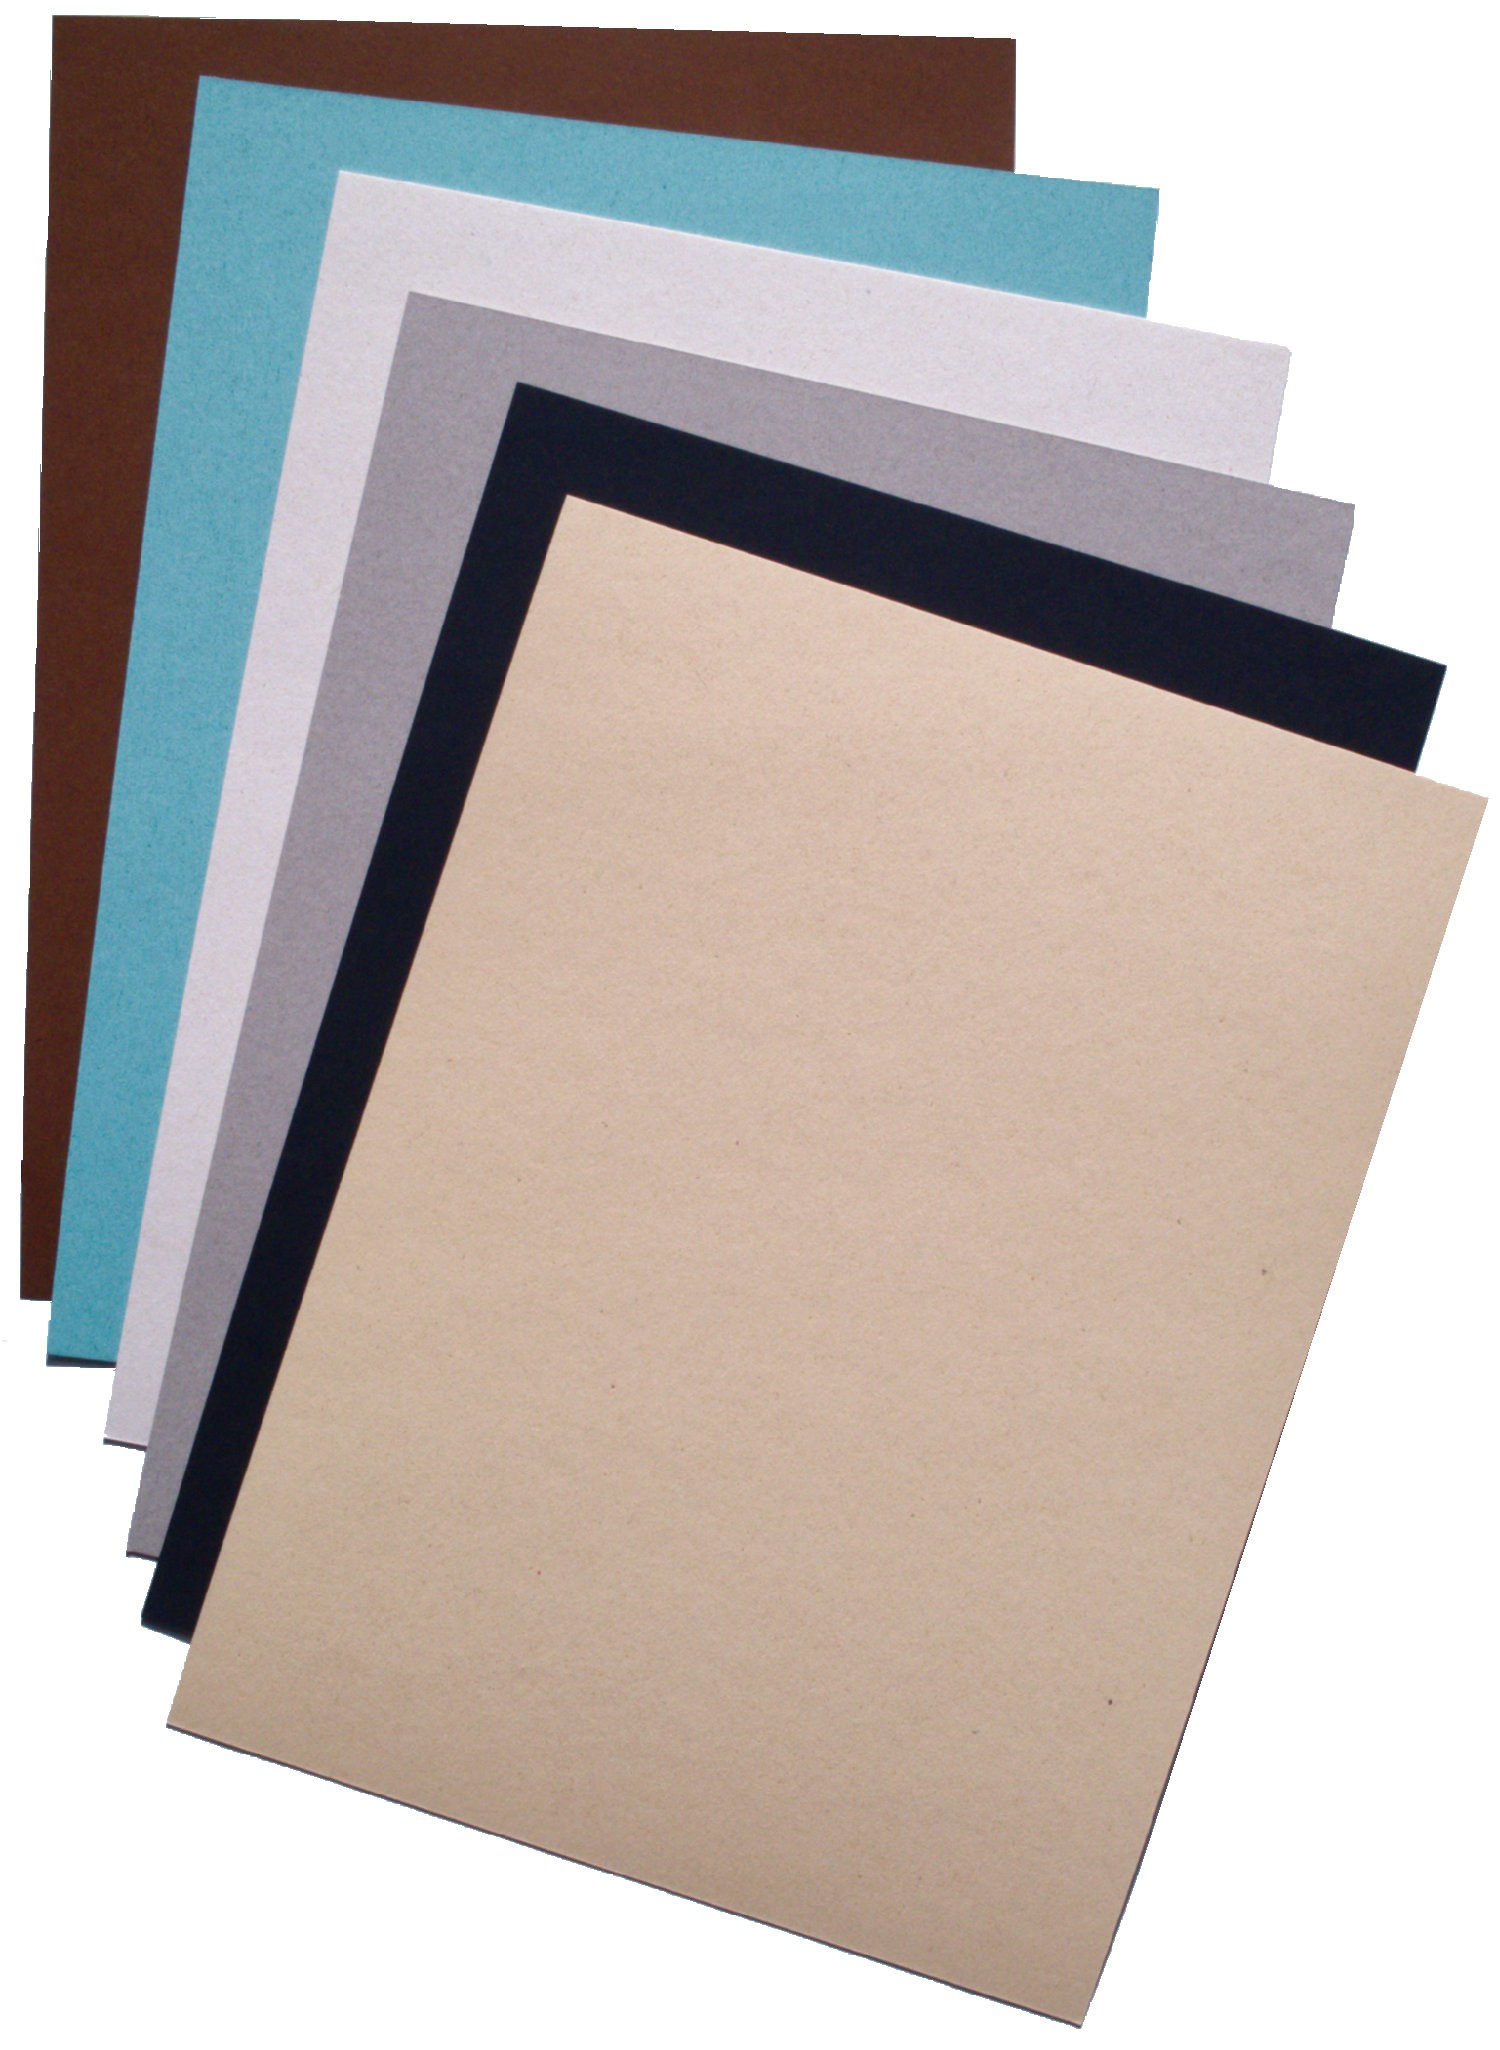 REMAKE Sand - 11X17 Card Stock Paper - 140lb Cover (380gsm) - 100 PK 